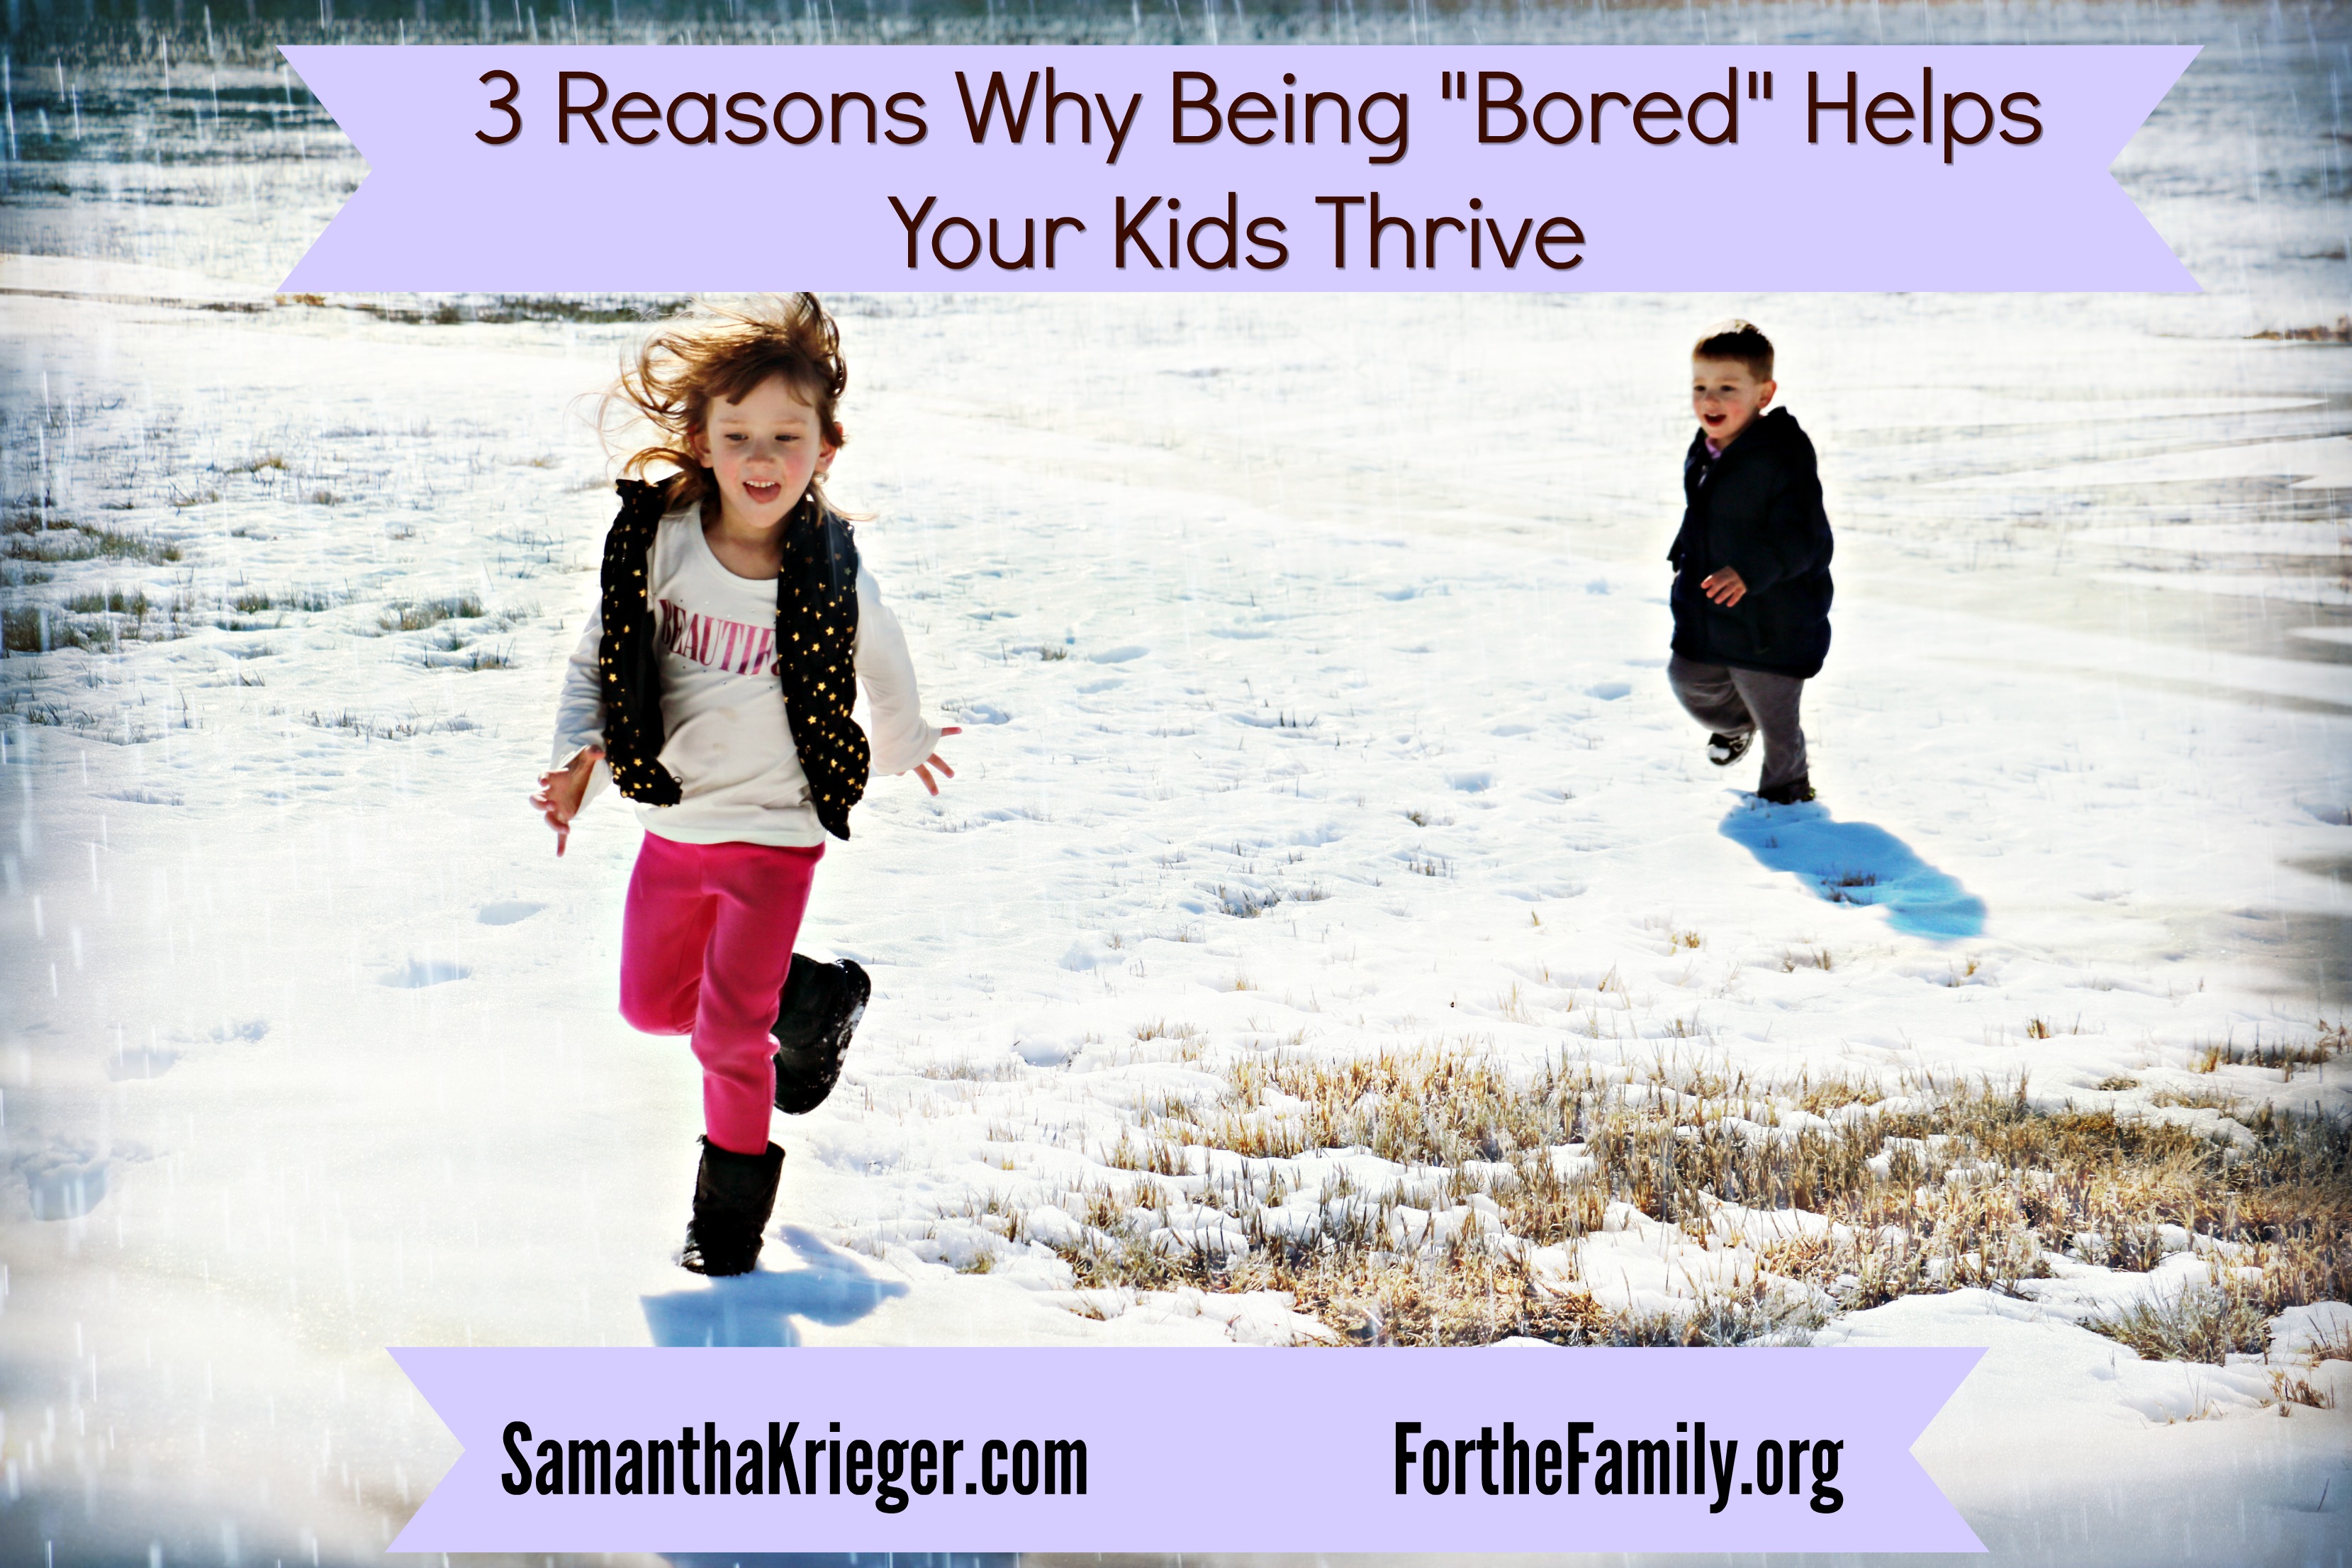 3 Reasons Why Being “Bored” Helps Your Kids Thrive